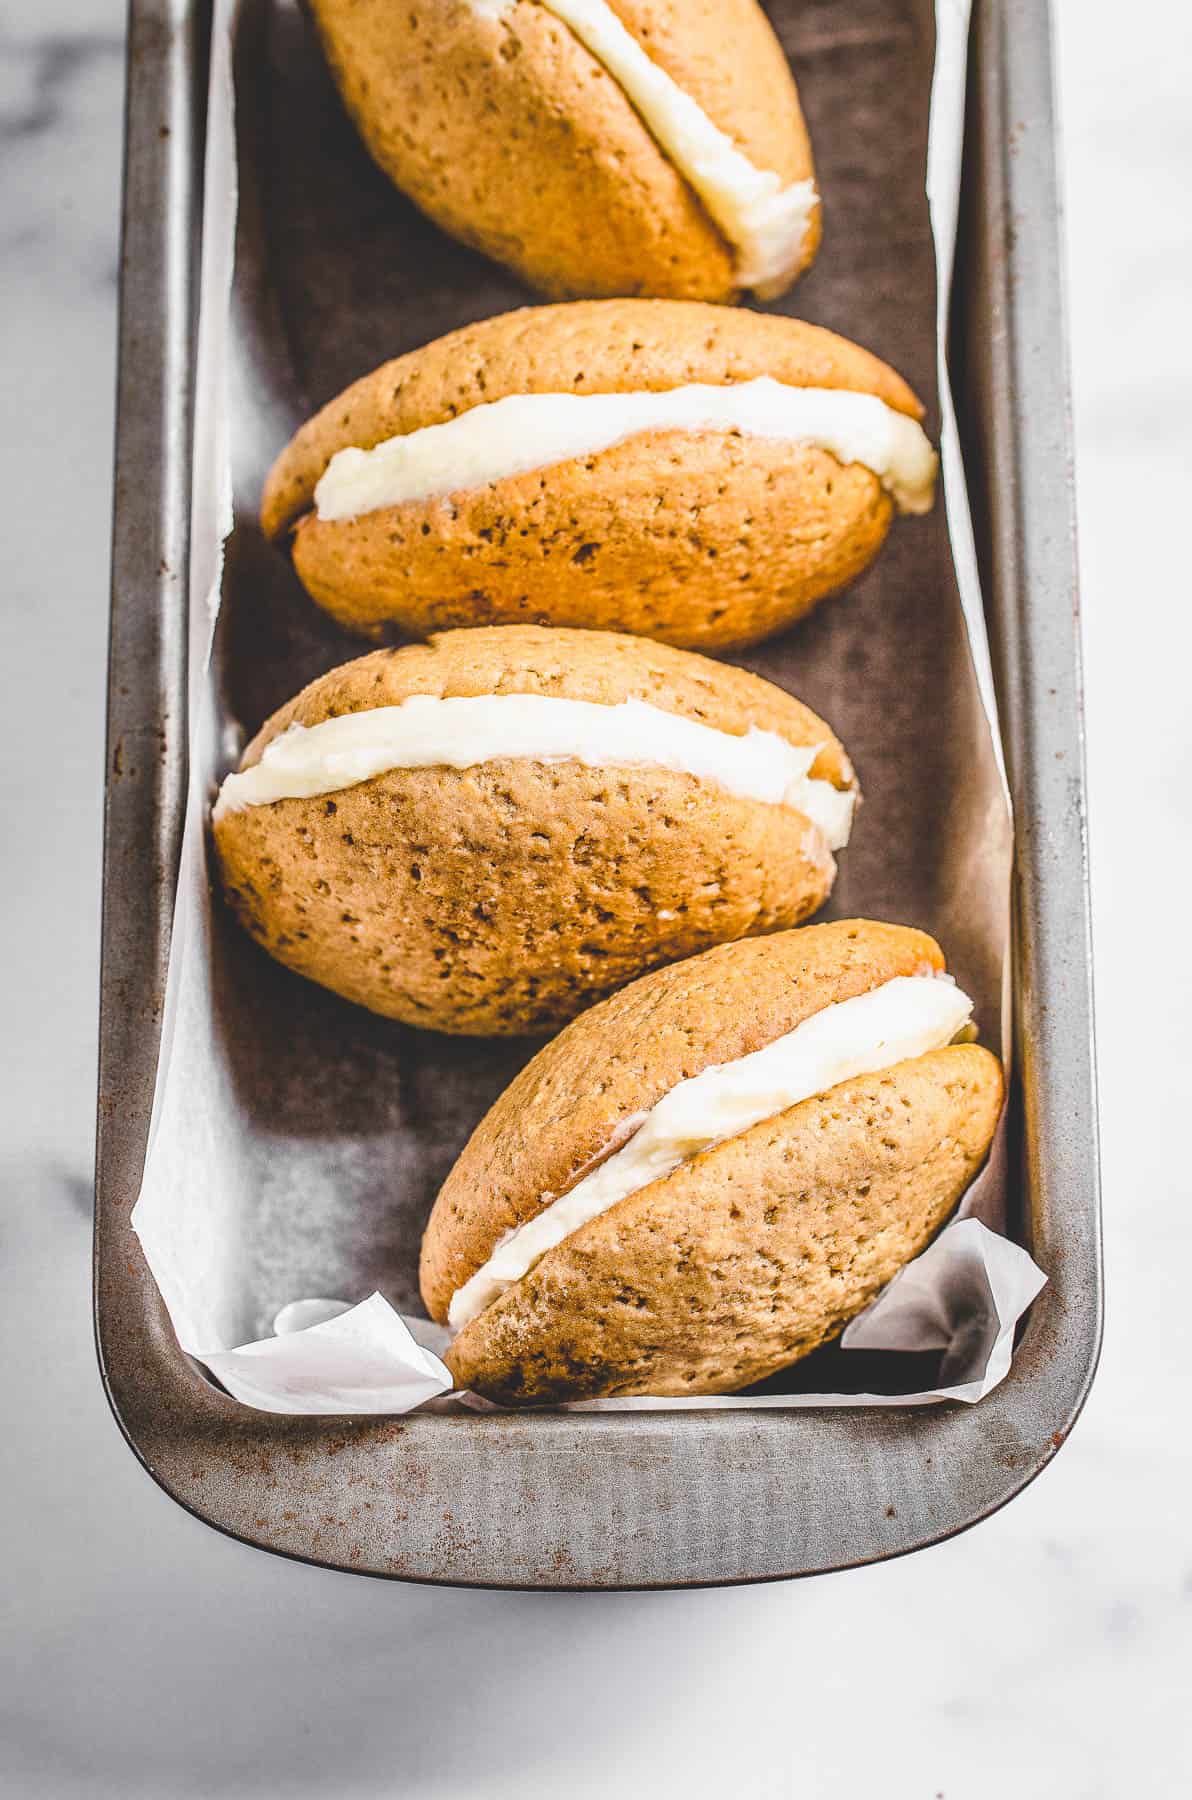 Gingerbread whoopie pies with vanilla buttercream filling.